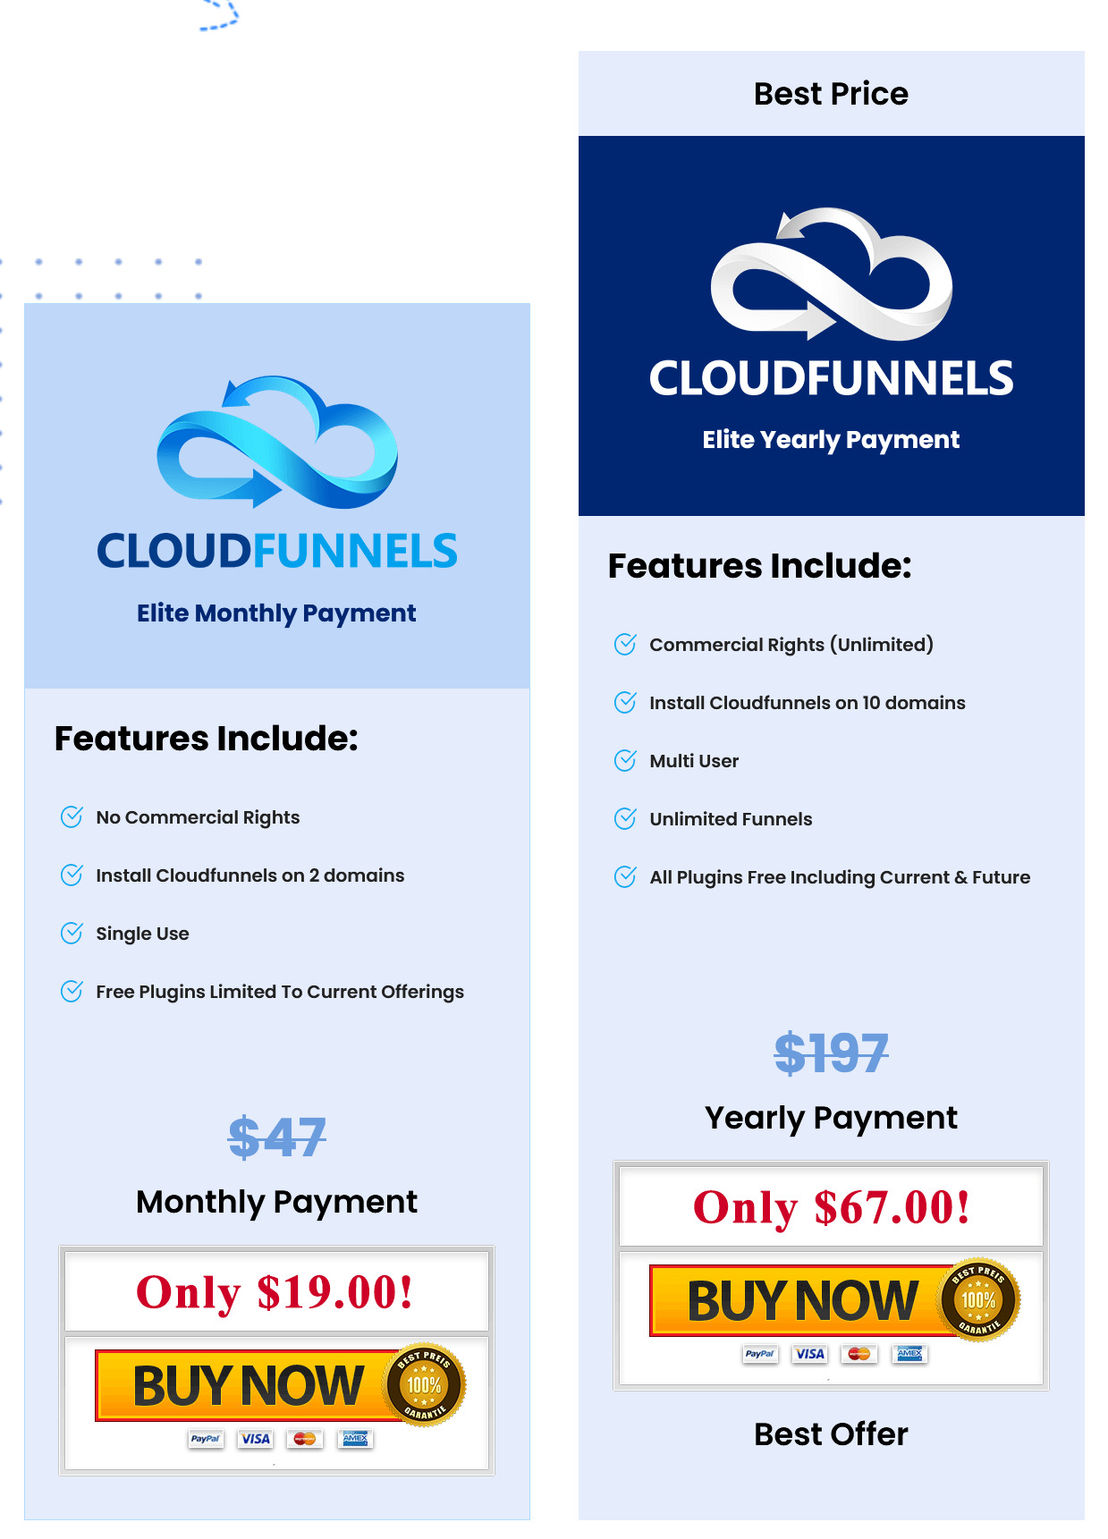 CloudFunnels Pricing